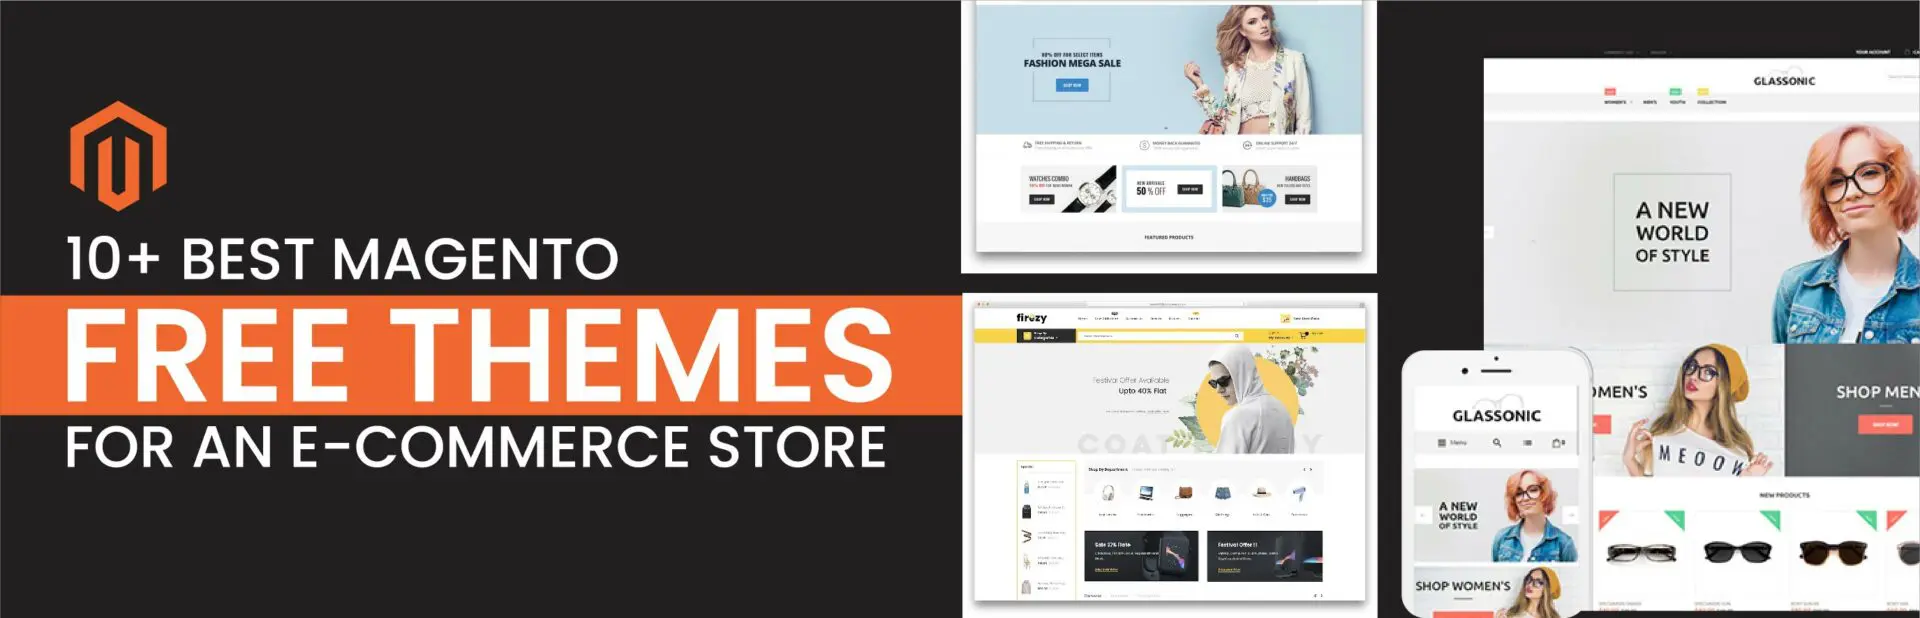 10+ Best Magento Free Themes for an E-commerce Store